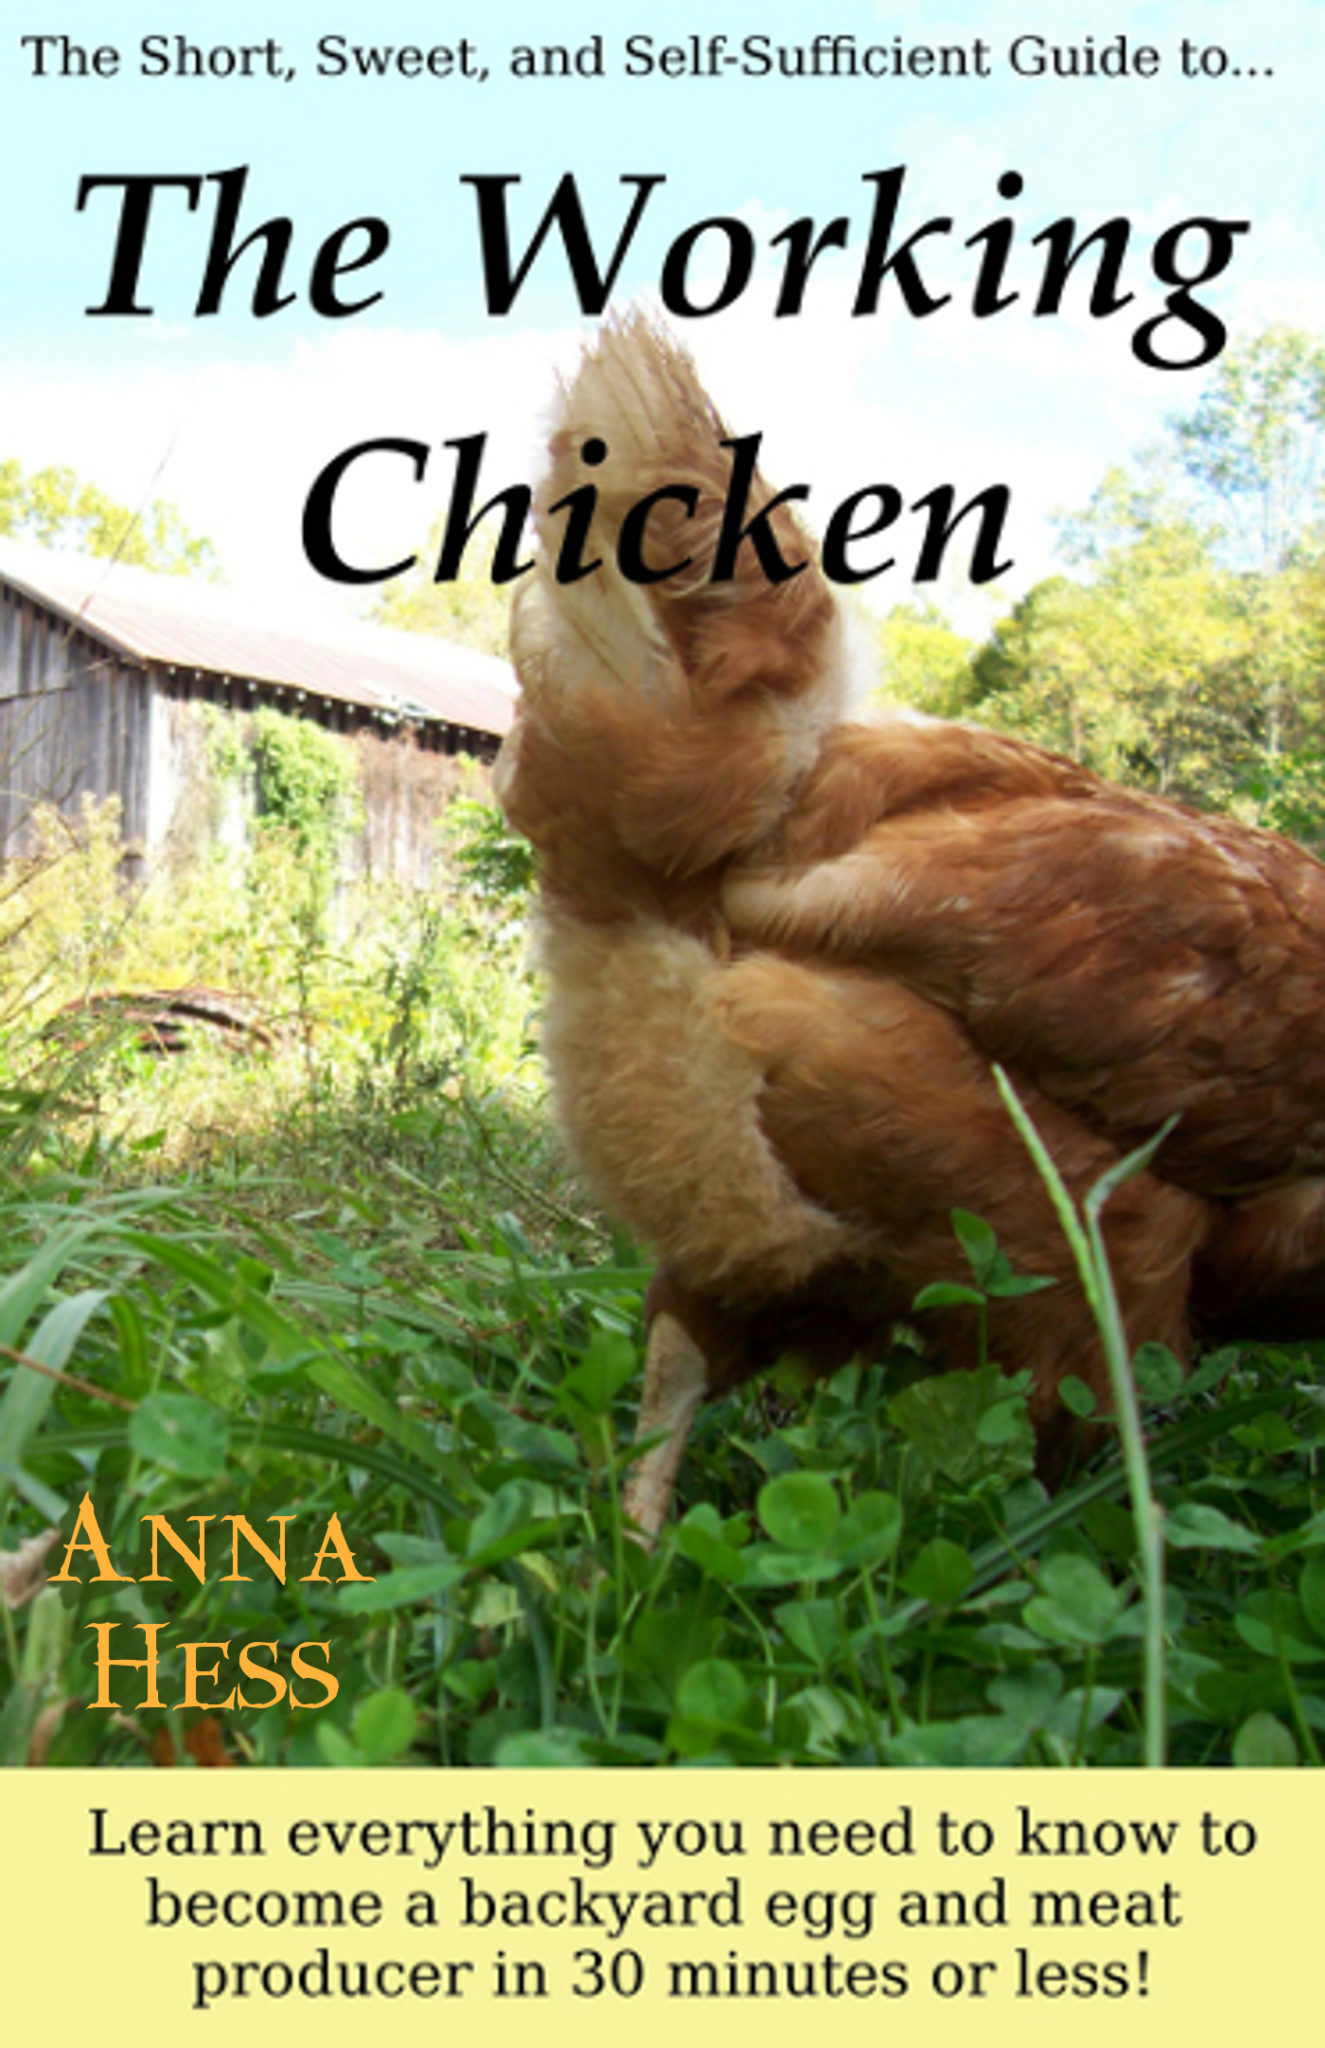 FREE: The Working Chicken by Anna Hess